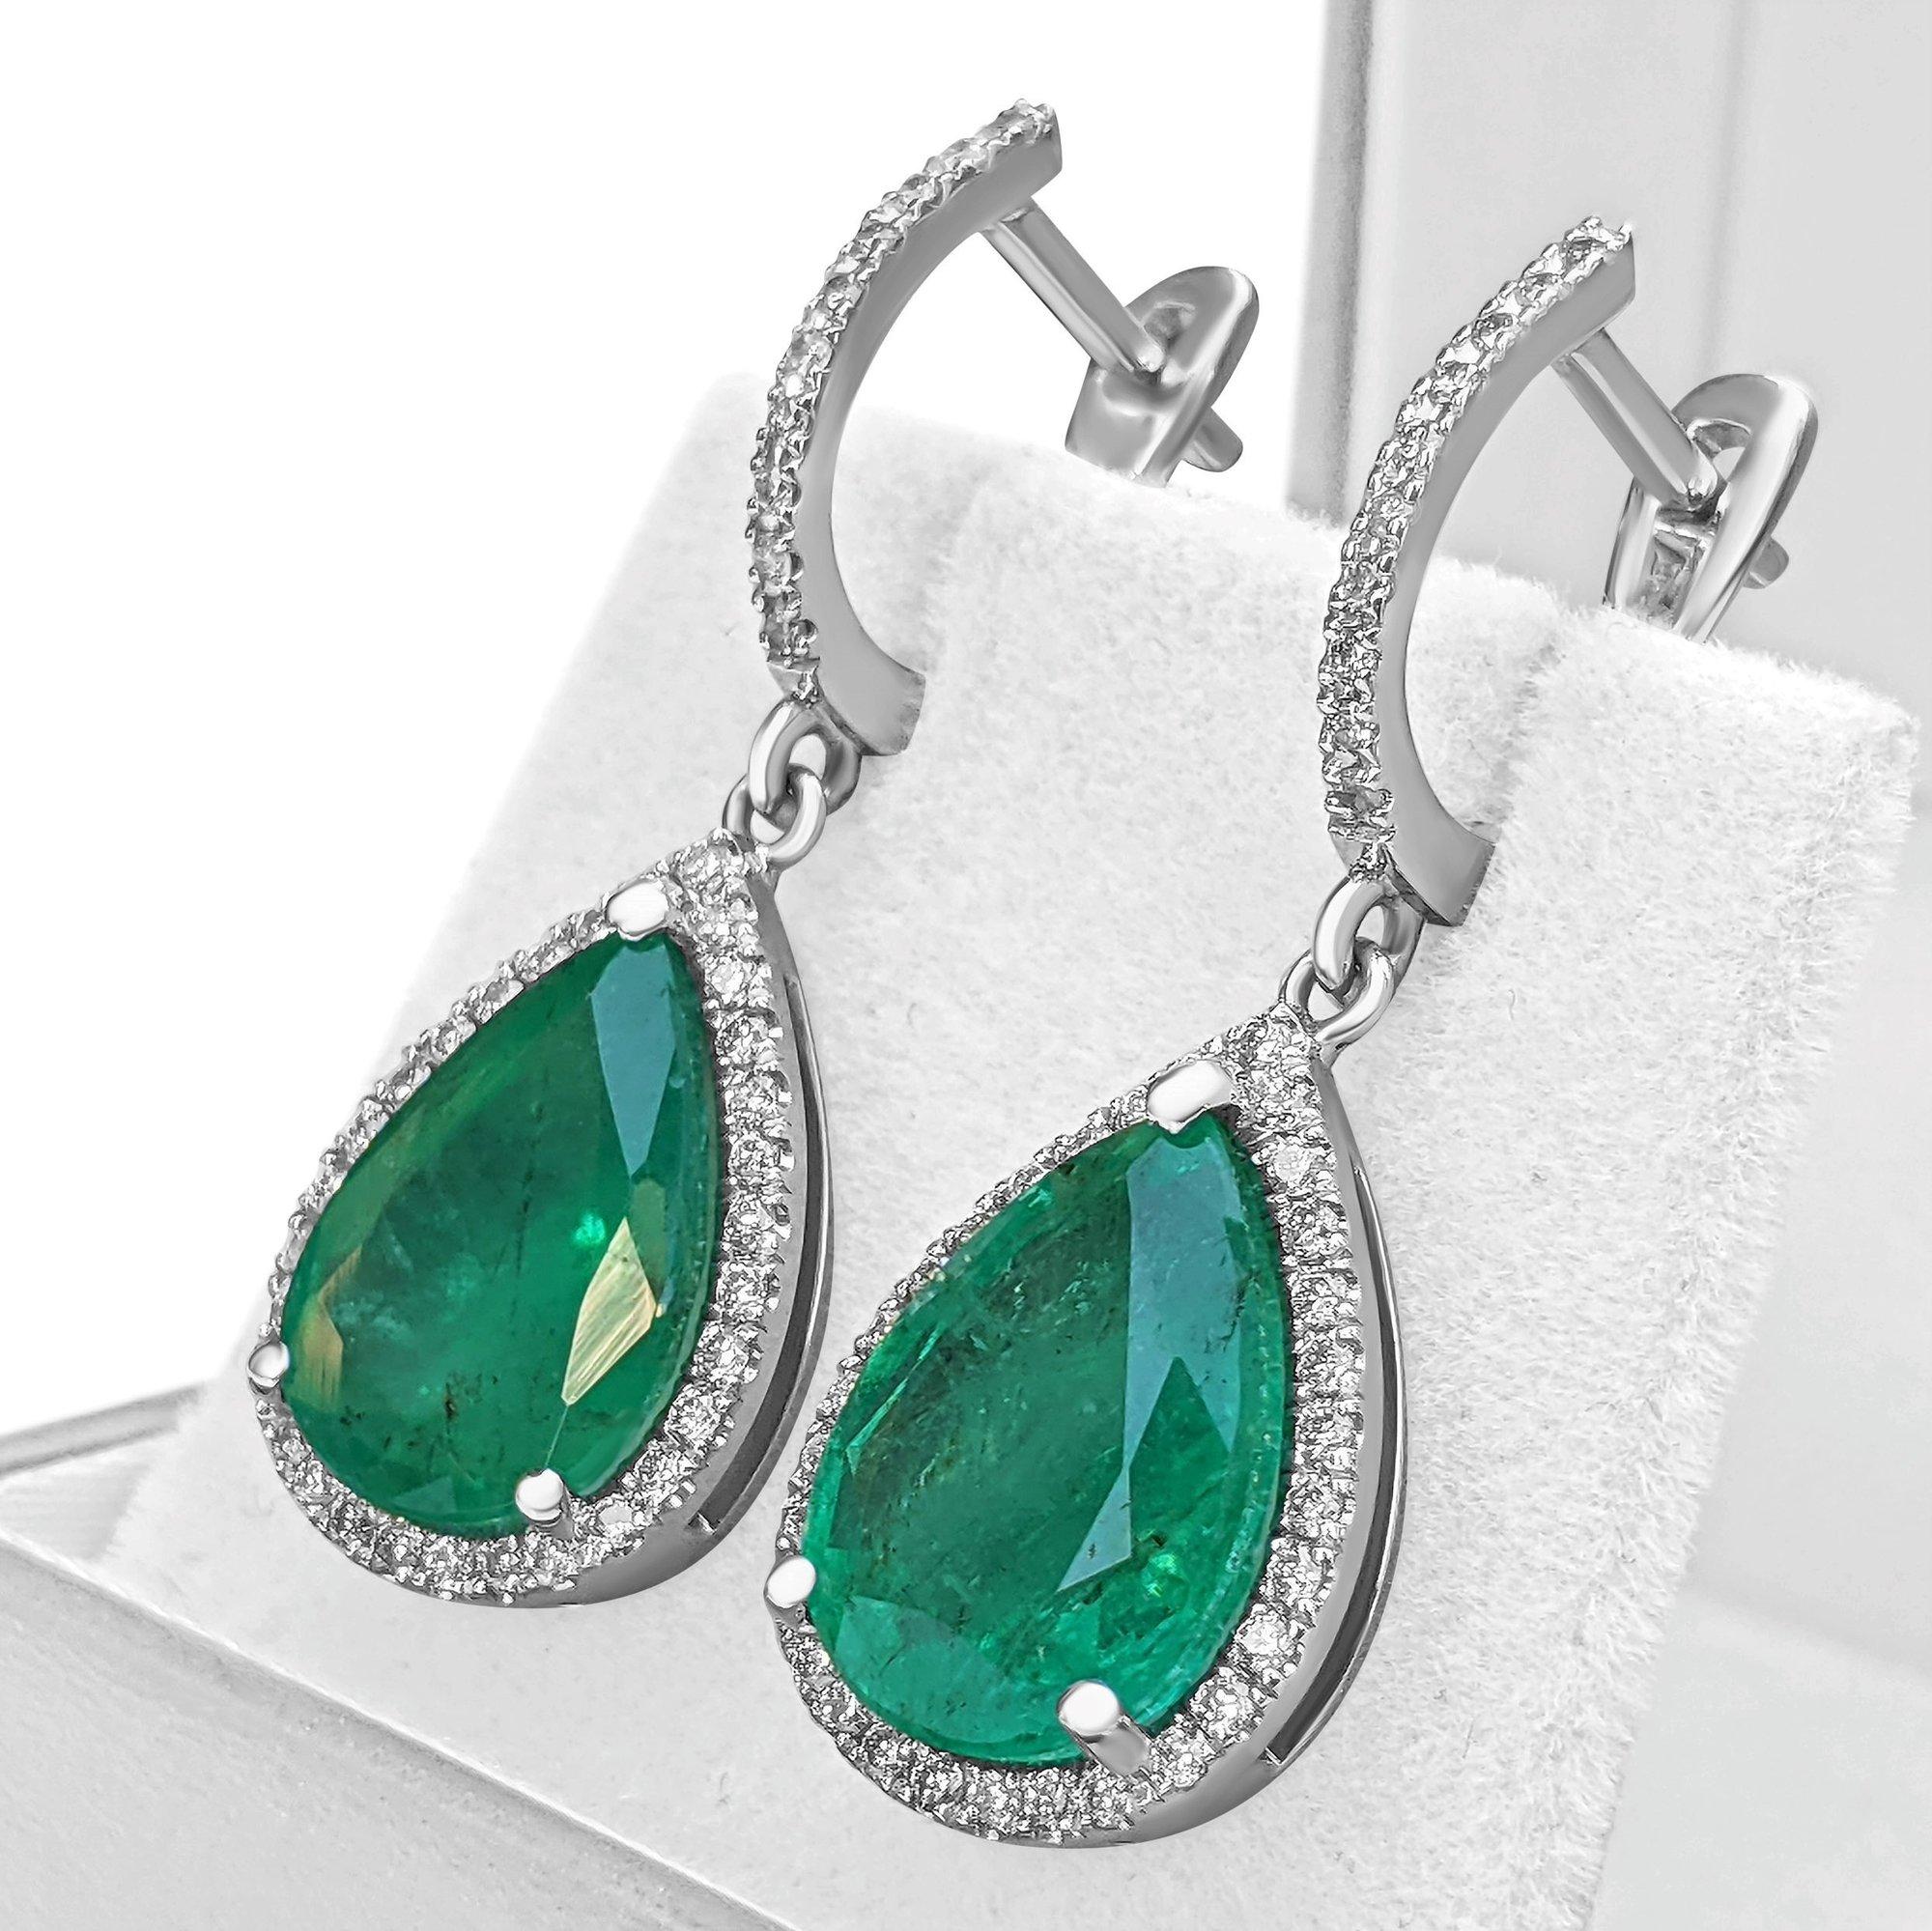 Pear Cut 9.57 Carat Emerald and 0.85 Ct Diamonds, 18 Kt. White Gold, Earrings